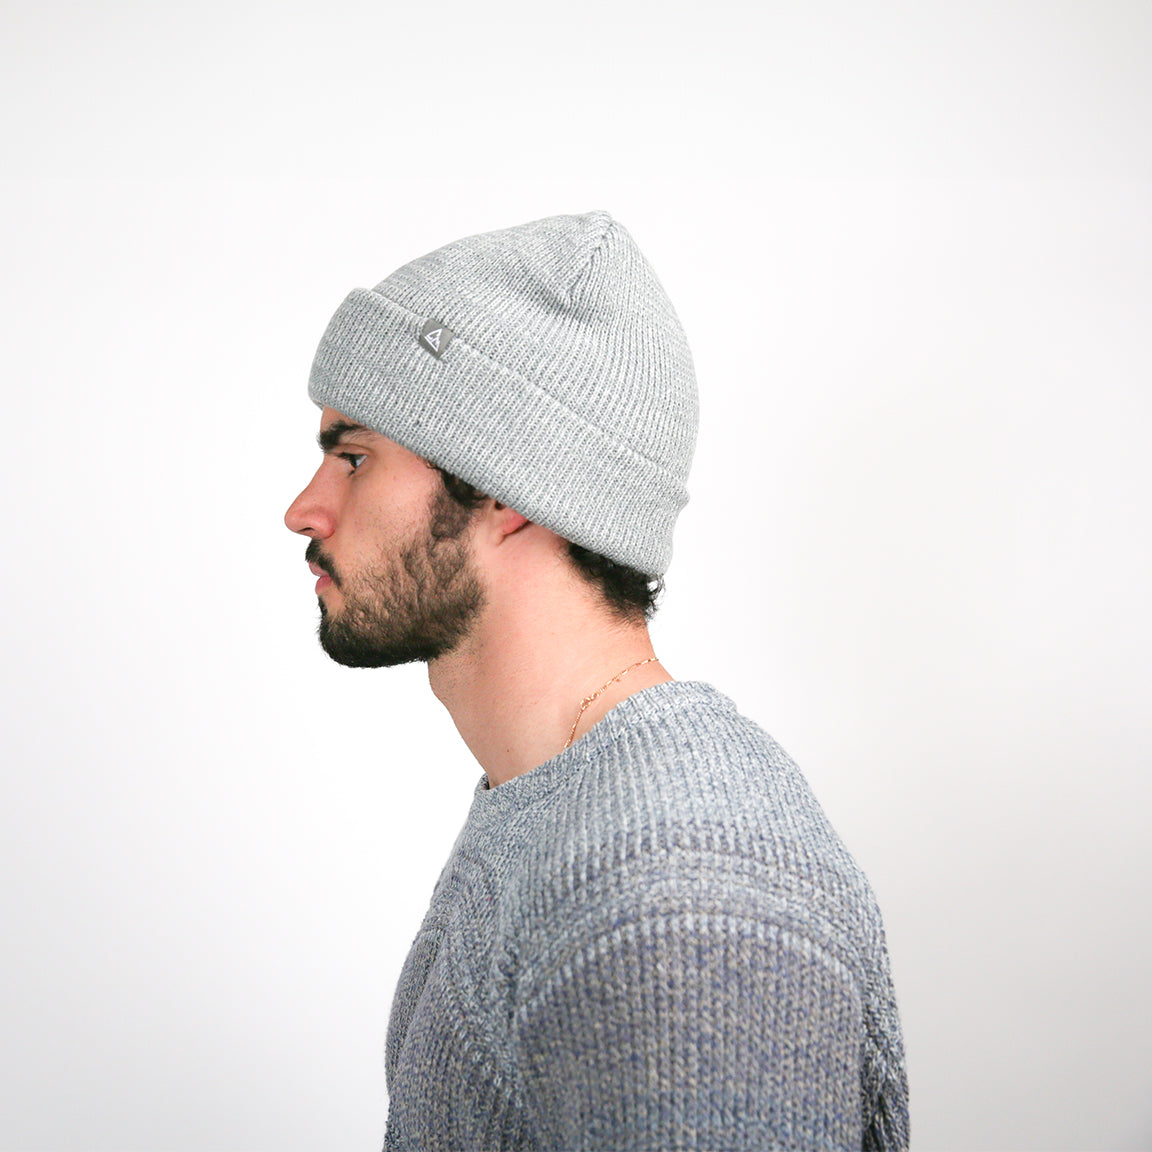 Viewed from the side, the light grey beanie reveals a fine ribbed pattern, along with a small, dark logo patch, contributing to the hat’s understated style.